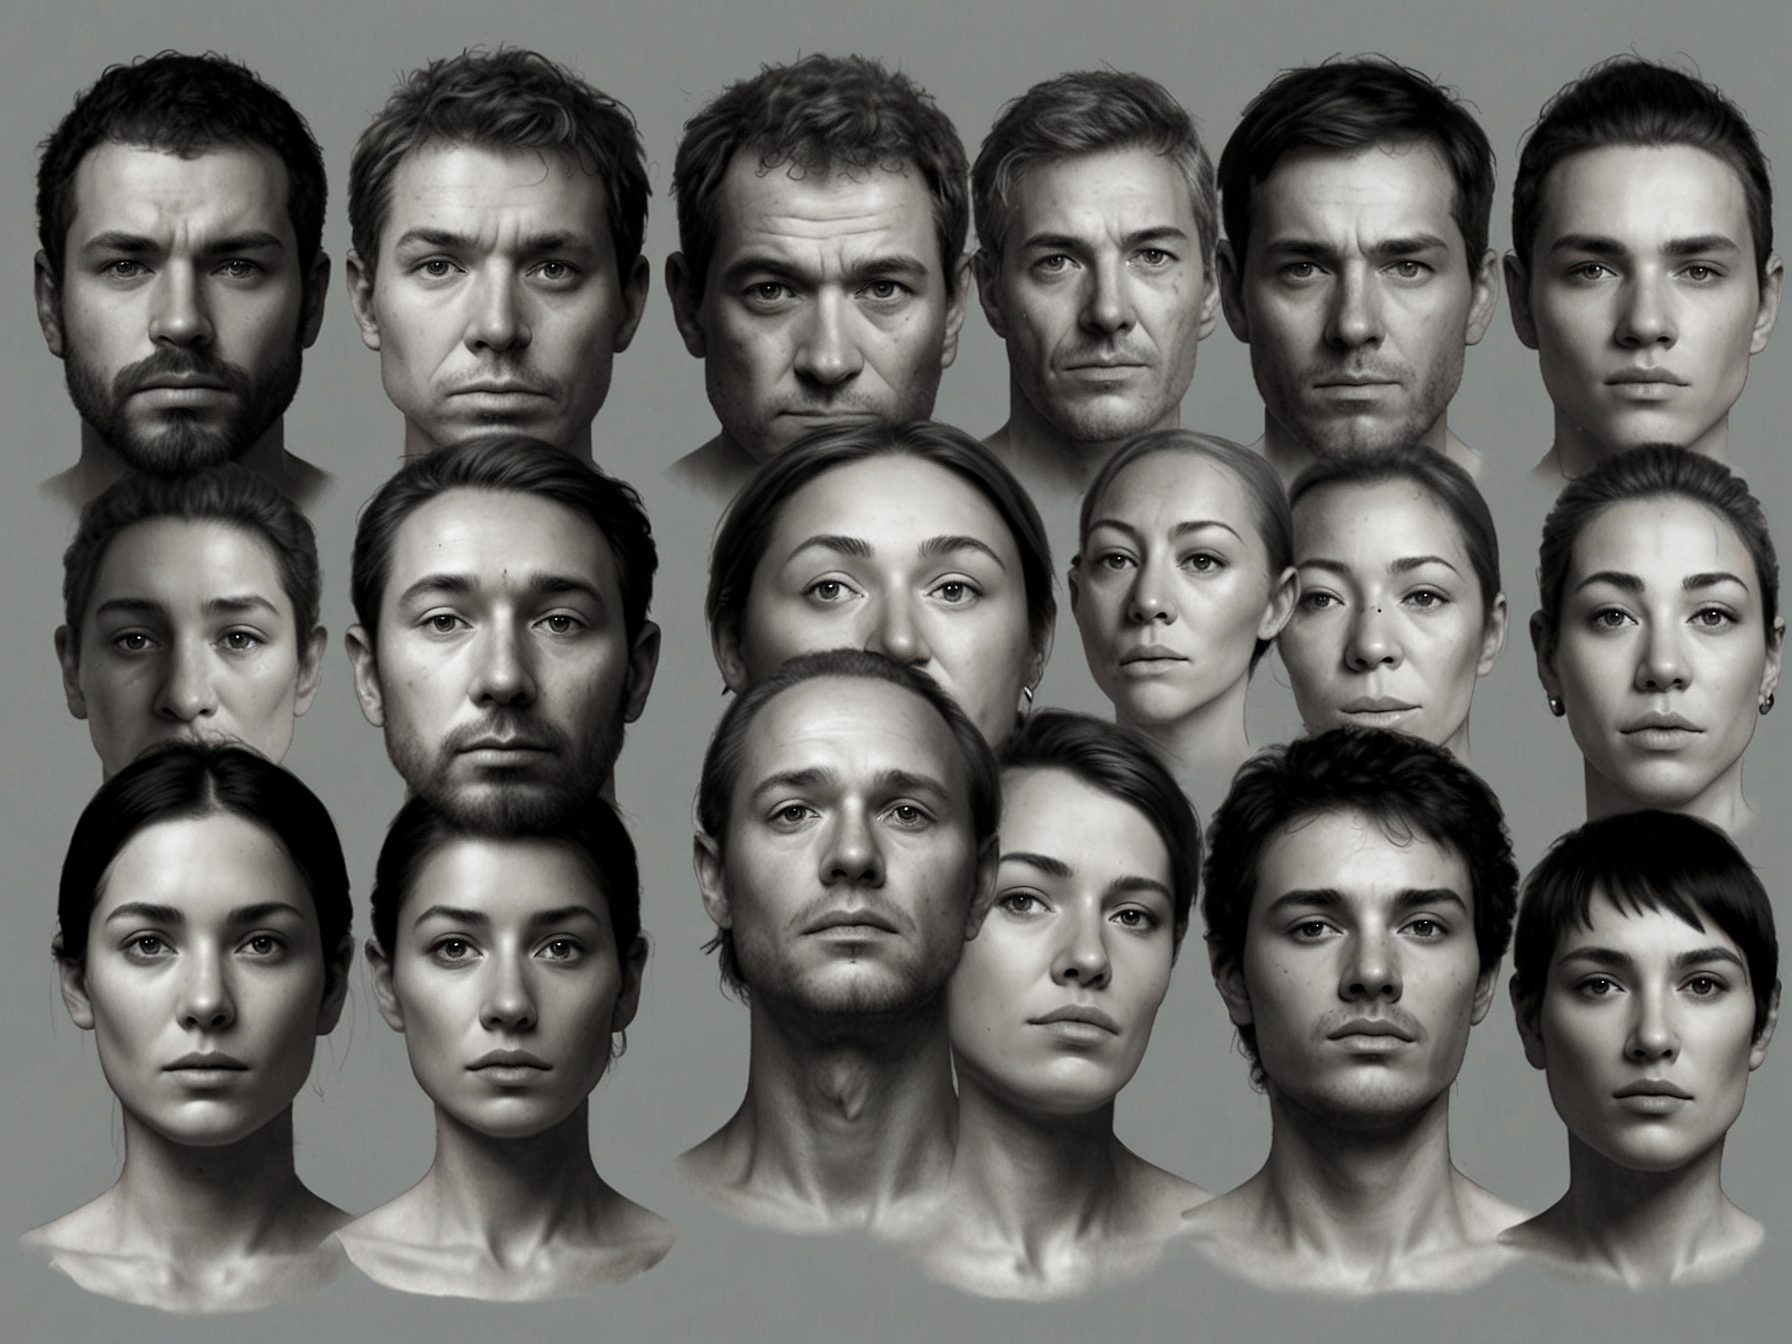 An AI-generated human avatar demonstrating realistic facial expressions and movements.